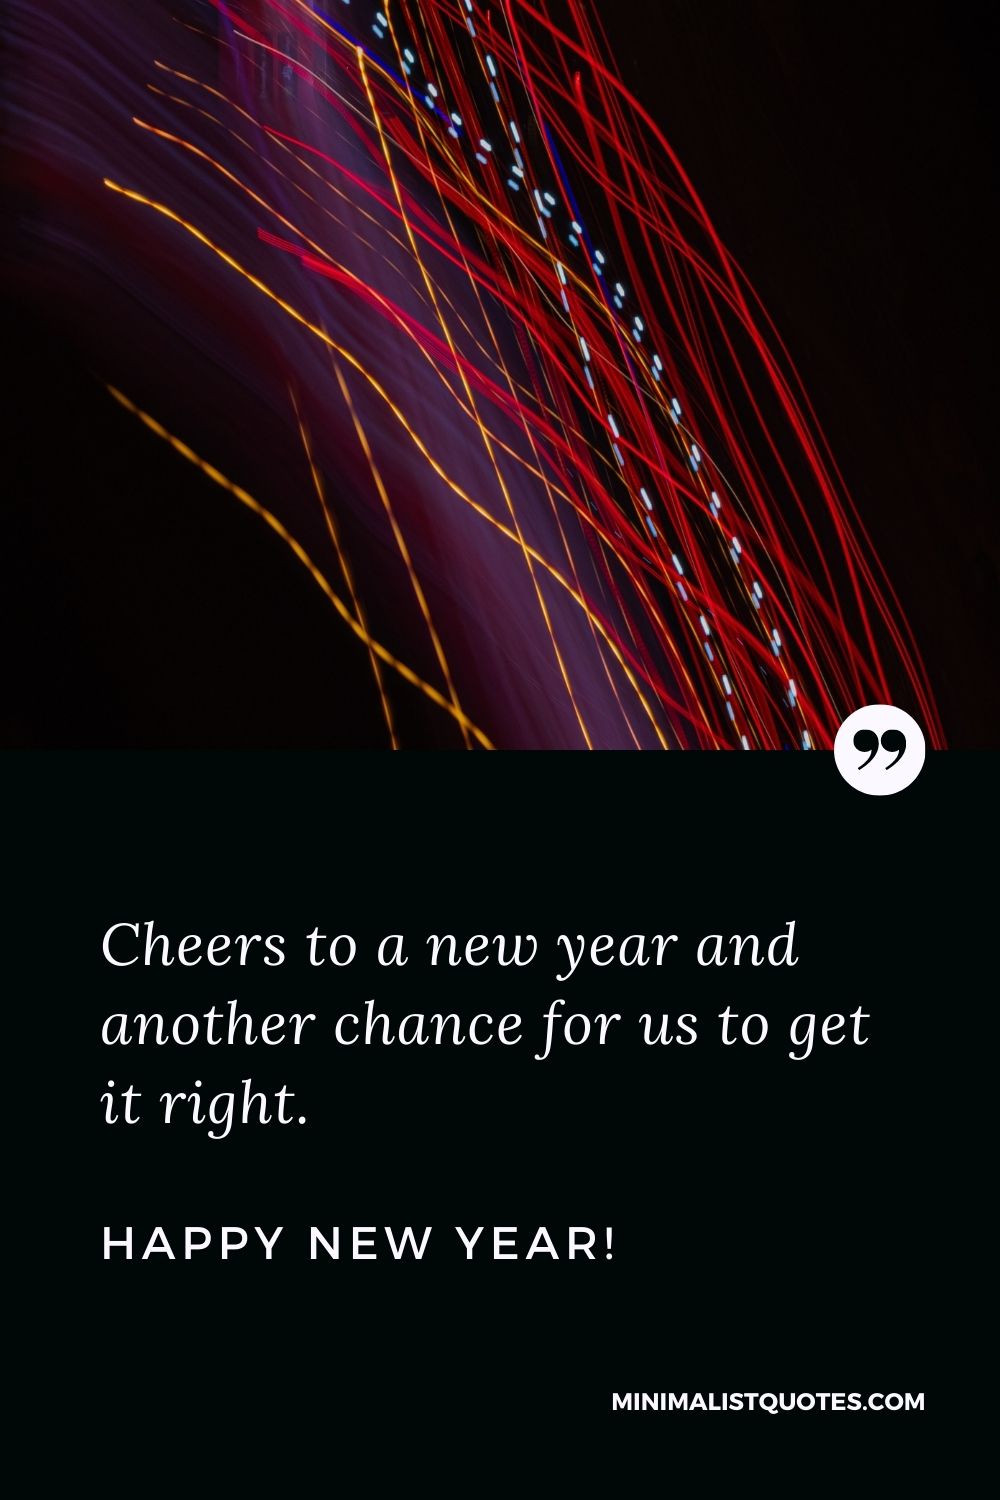 Professional New Year Quote: Cheers to a new year and another chance for us to get it right. Happy New Year!